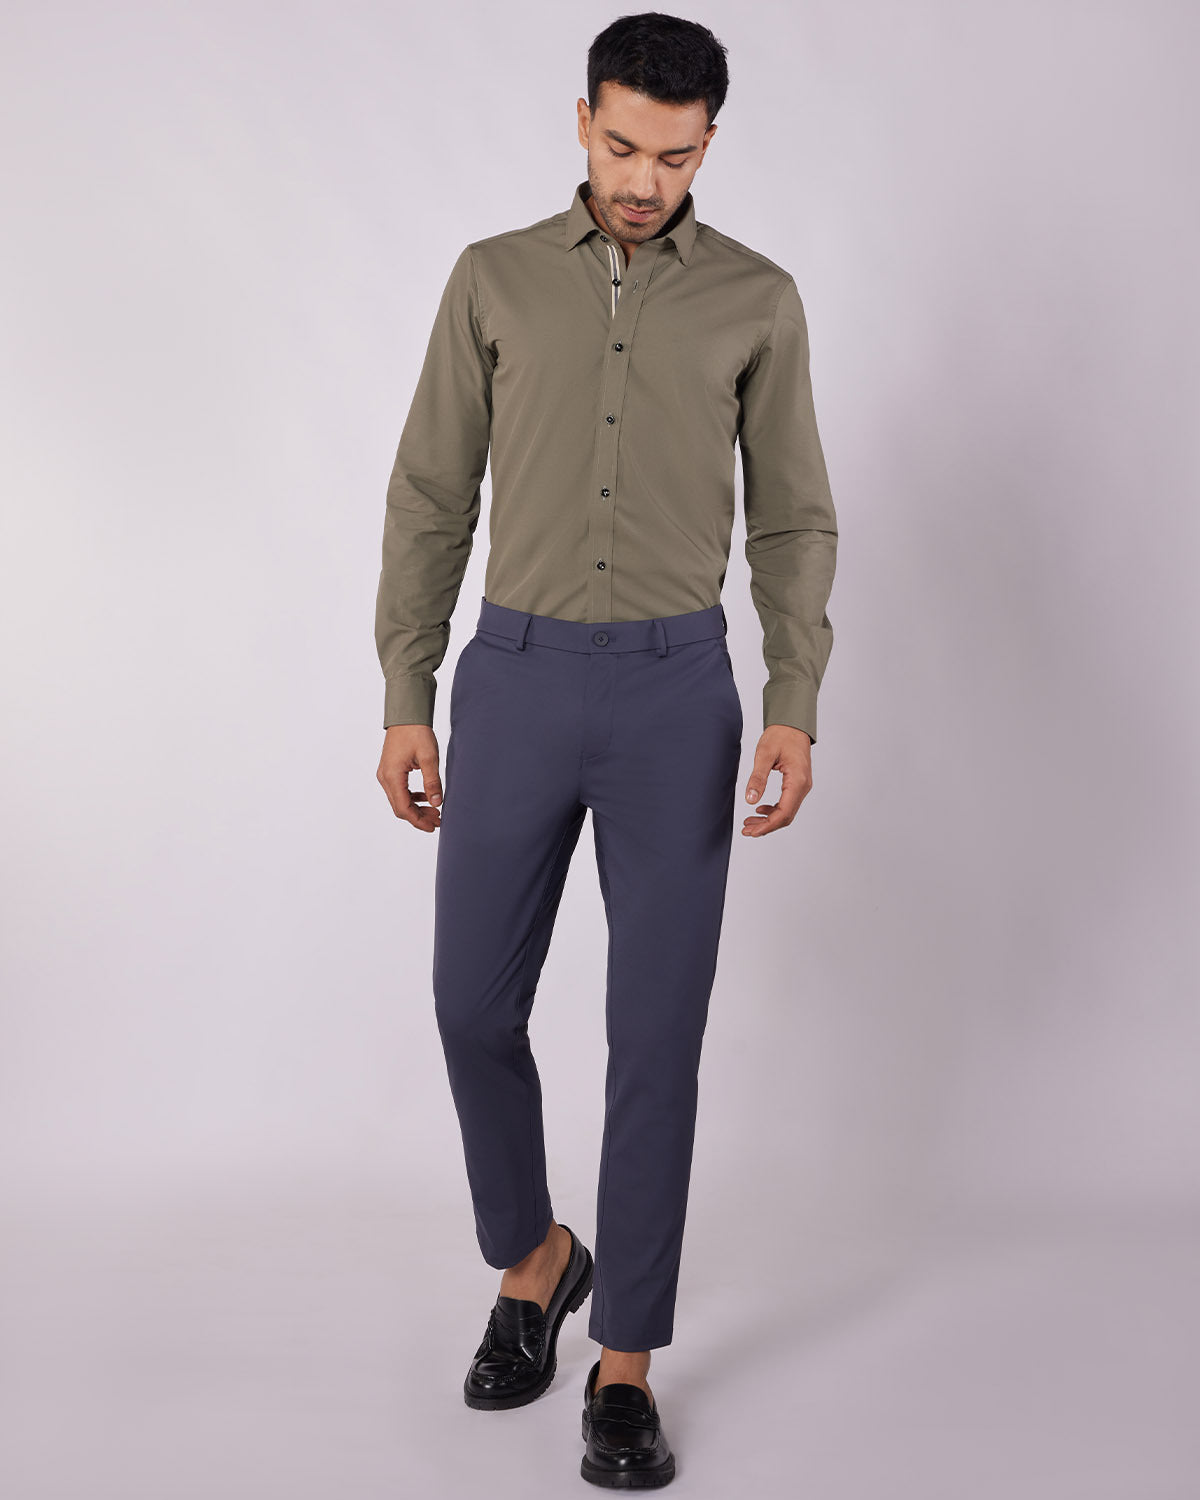 What color shirts match with gray pants? - Quora